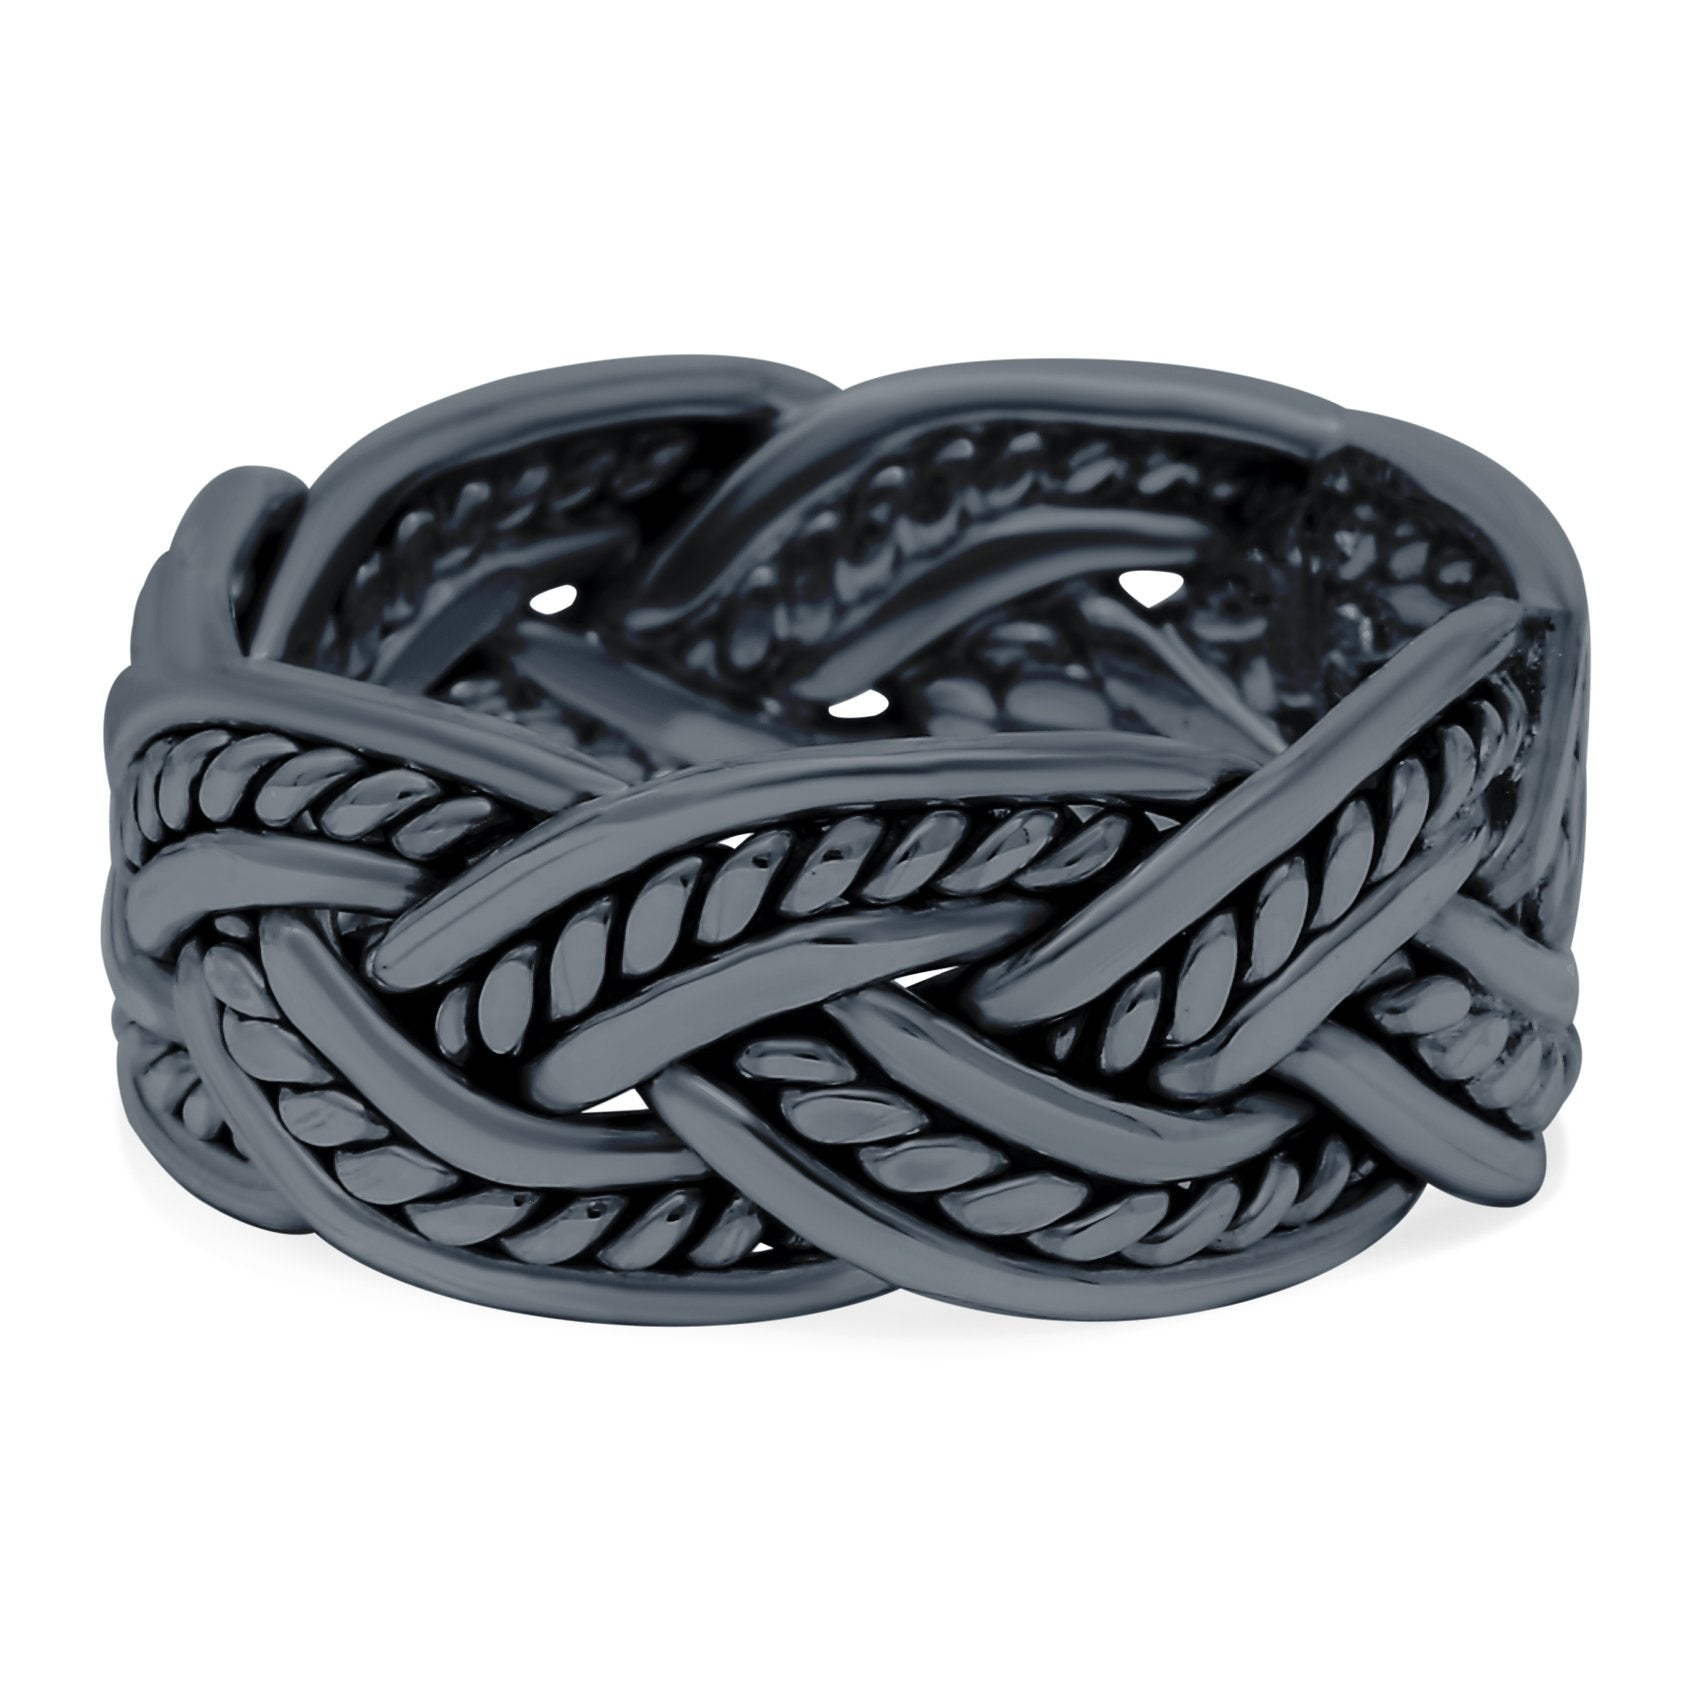 Braided Ring Oxidized Band Solid 925 Sterling Silver (9mm)